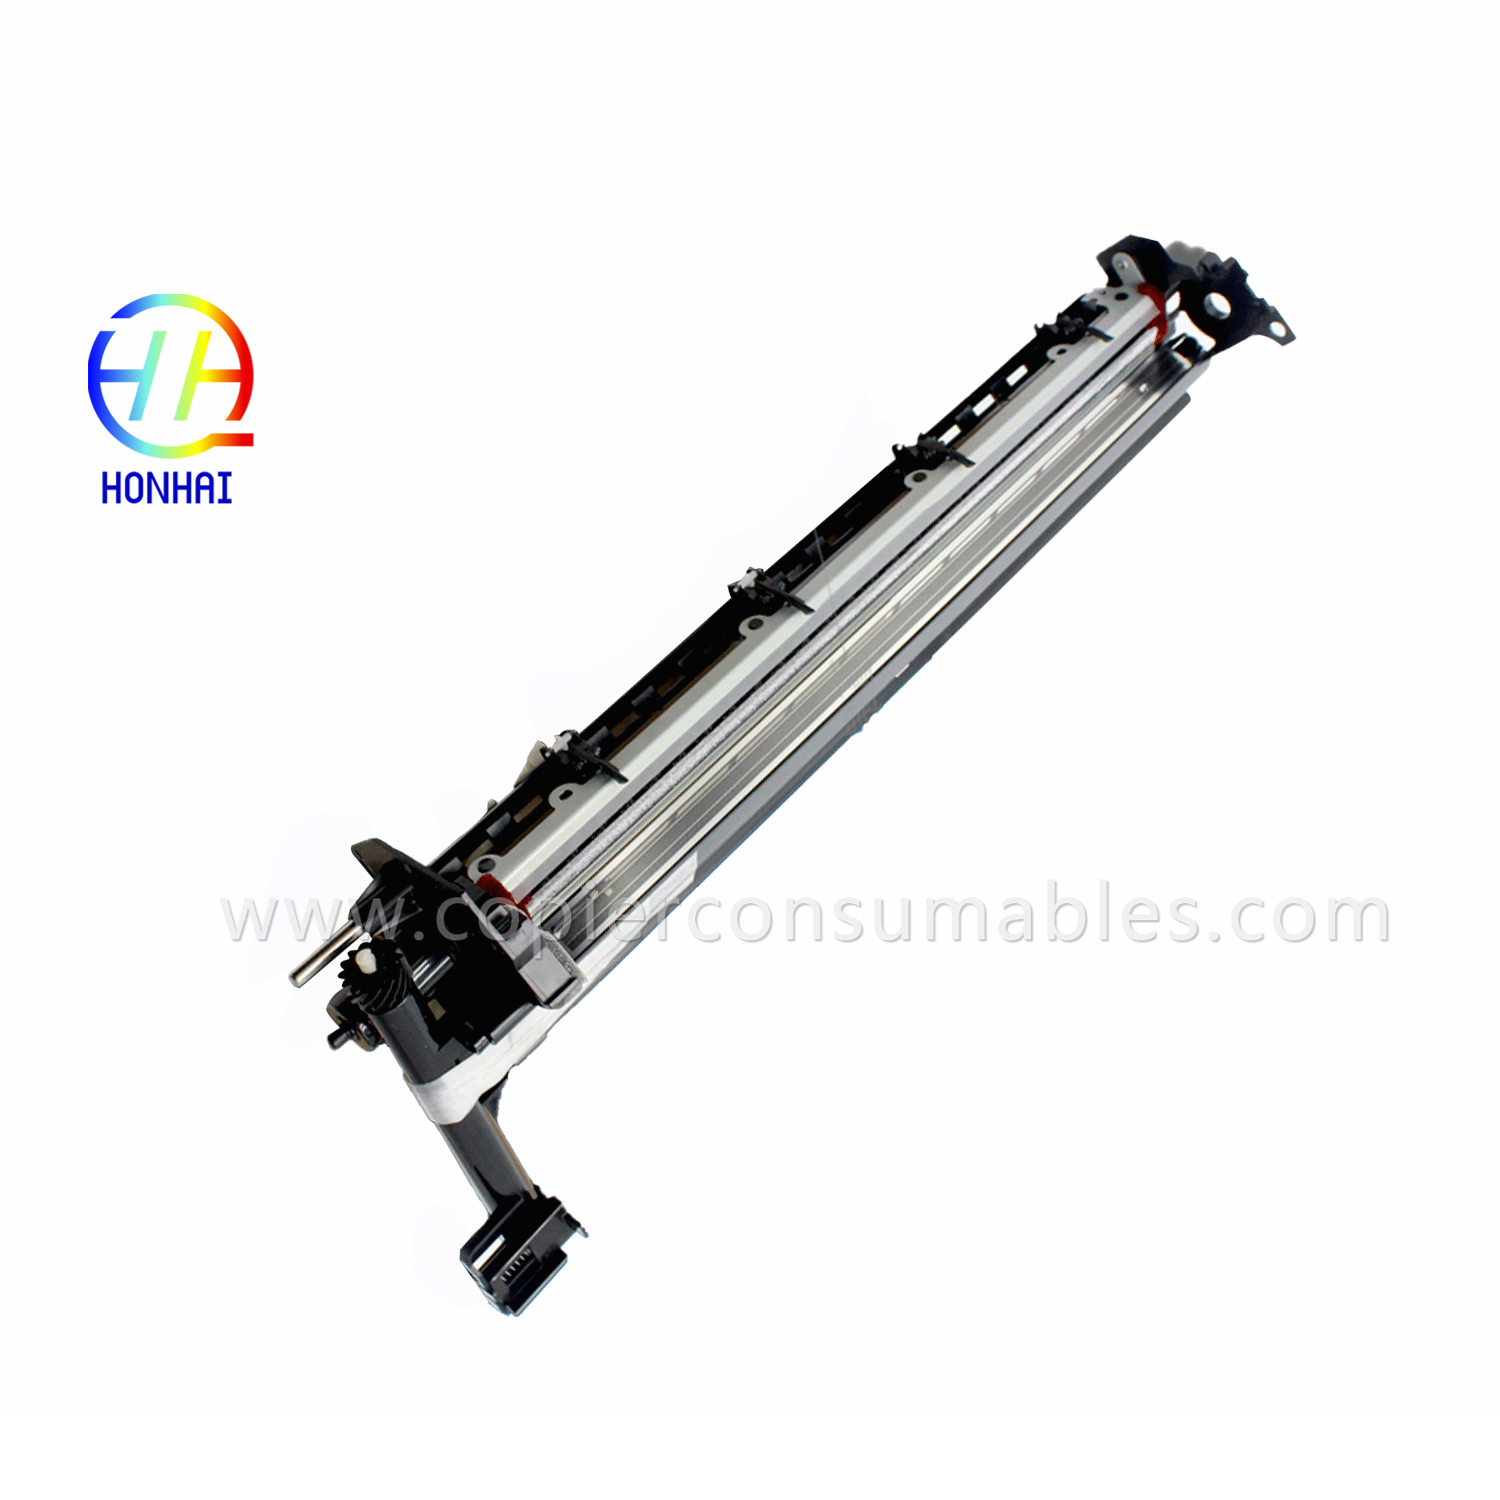 Trommelramme for Sharp Ar-5320 5320d Arm-160 162 205 207 (Sharp CFRM-0021RS5T CFRM-0021RS6D Toshiba 6LS11678000) OEM